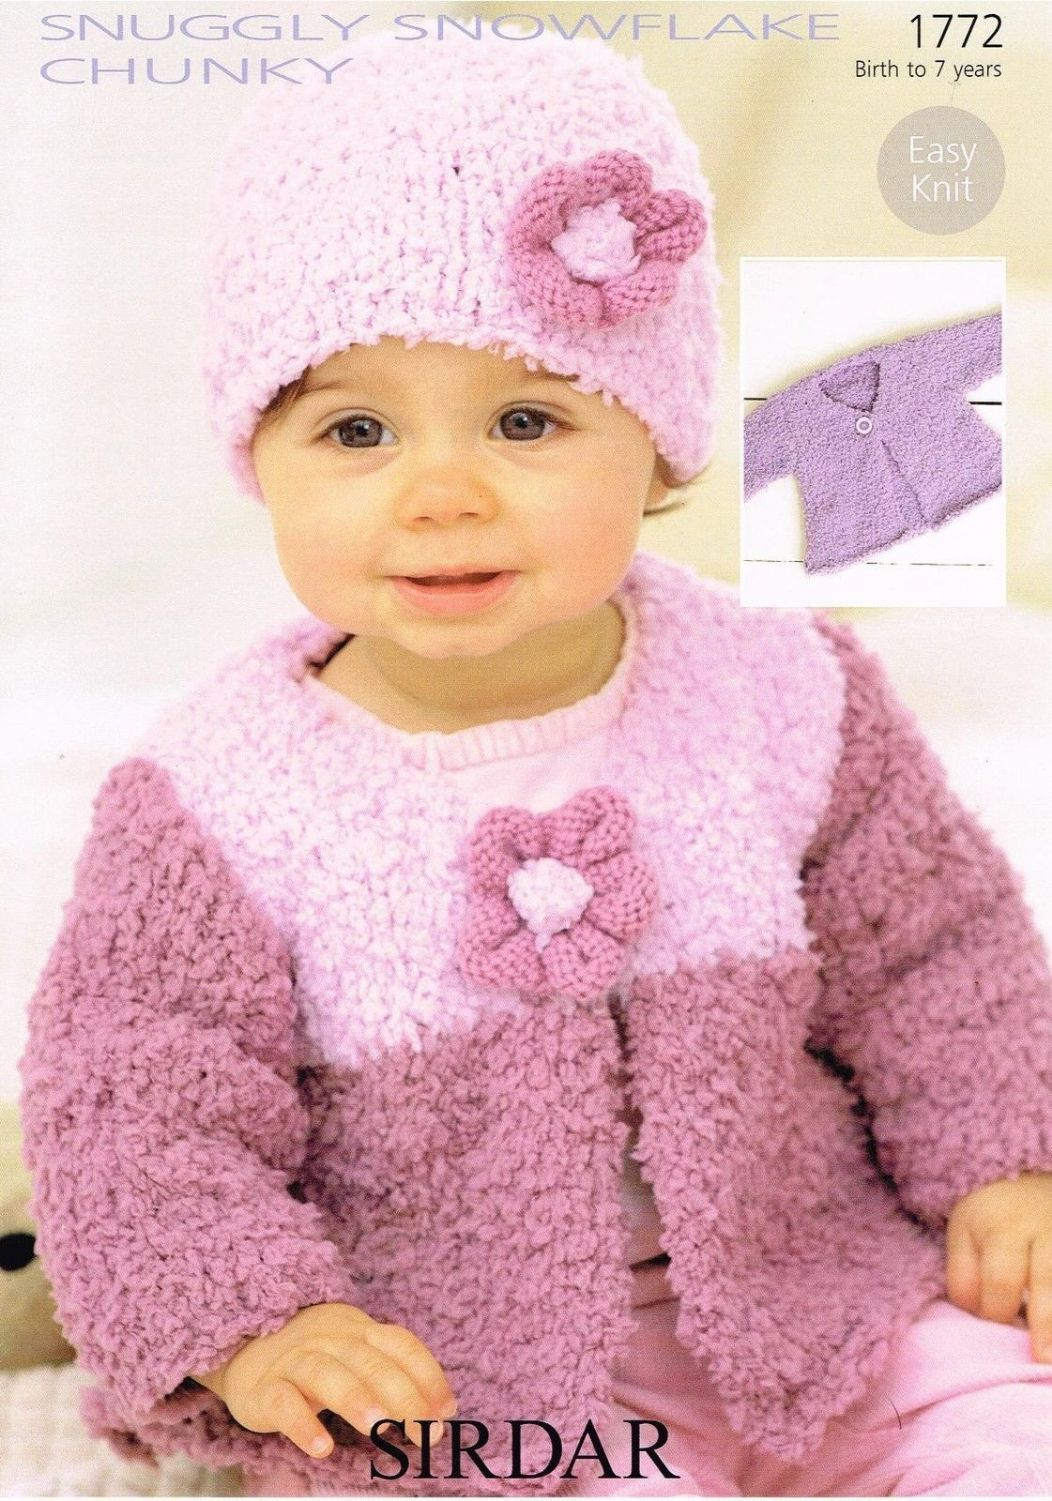 Sirdar Snuggly Knitting Patterns 1772 Sirdar Snuggly Snowflake Chunky Cardigan Hat Knitting Pattern To Fit 0 To 7 Years